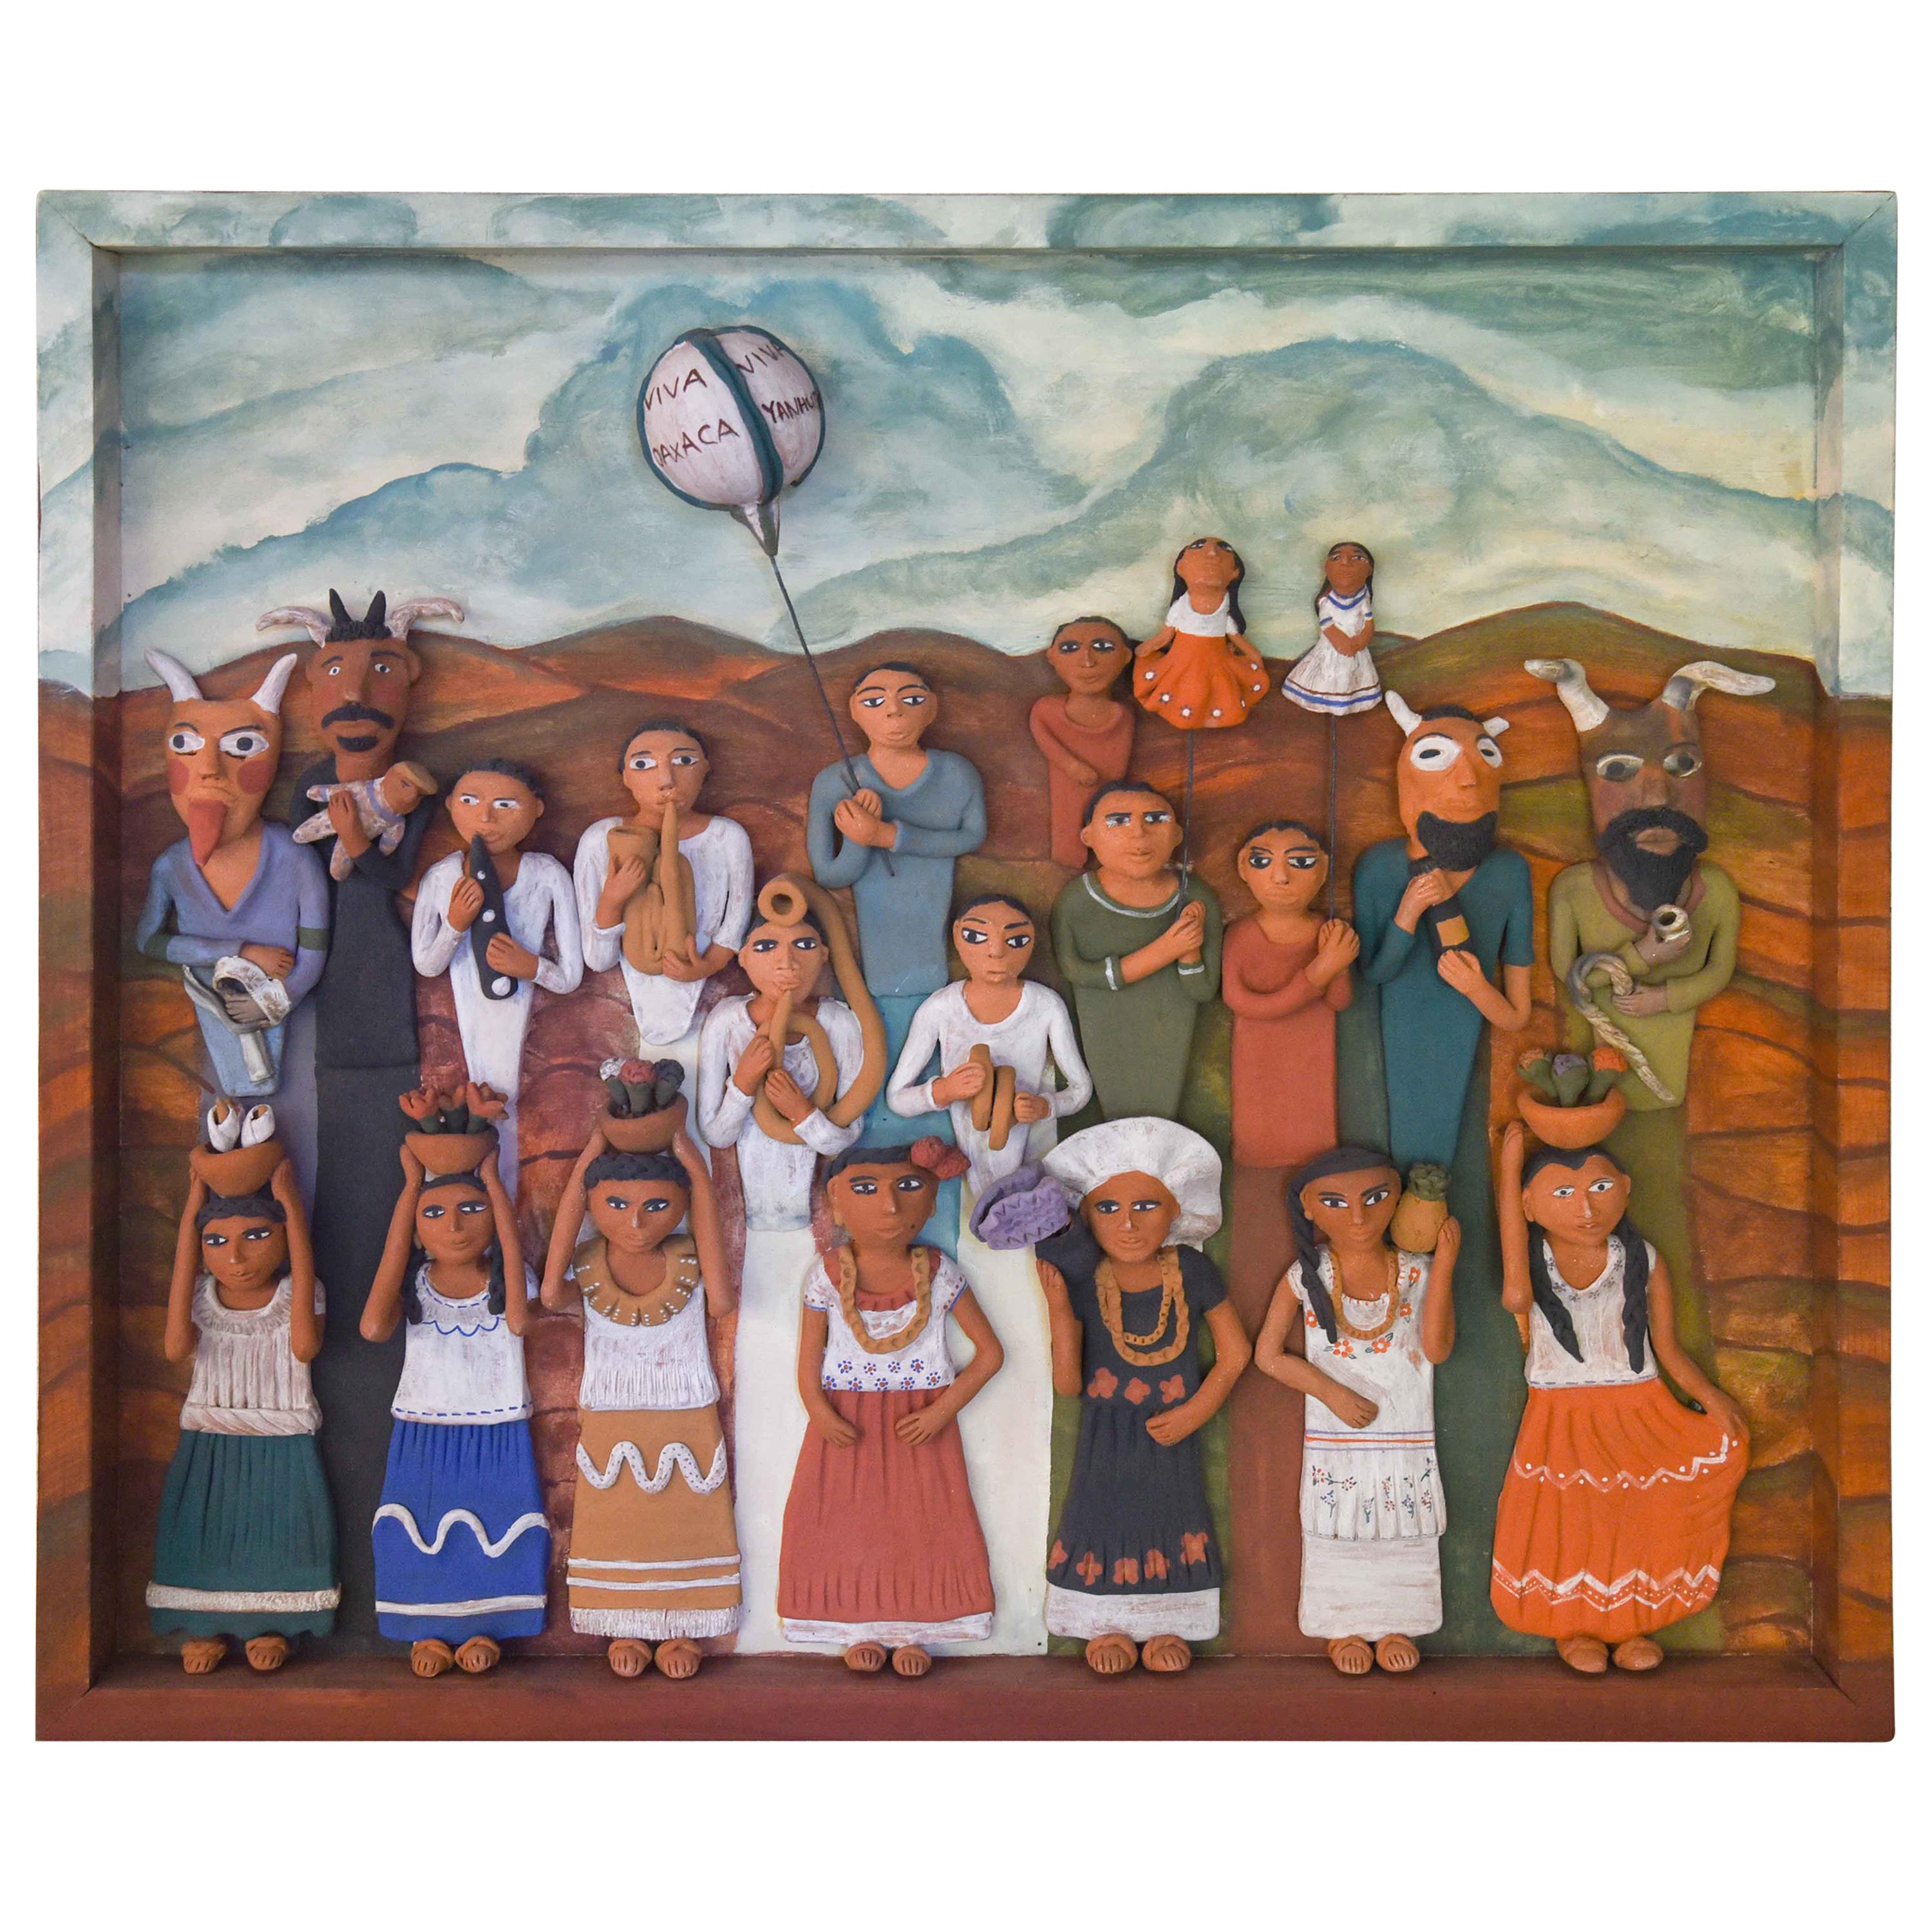 Mexican Burnished Clay Figures Folklore with Wooden Frame Folk Art Oaxaca Wall